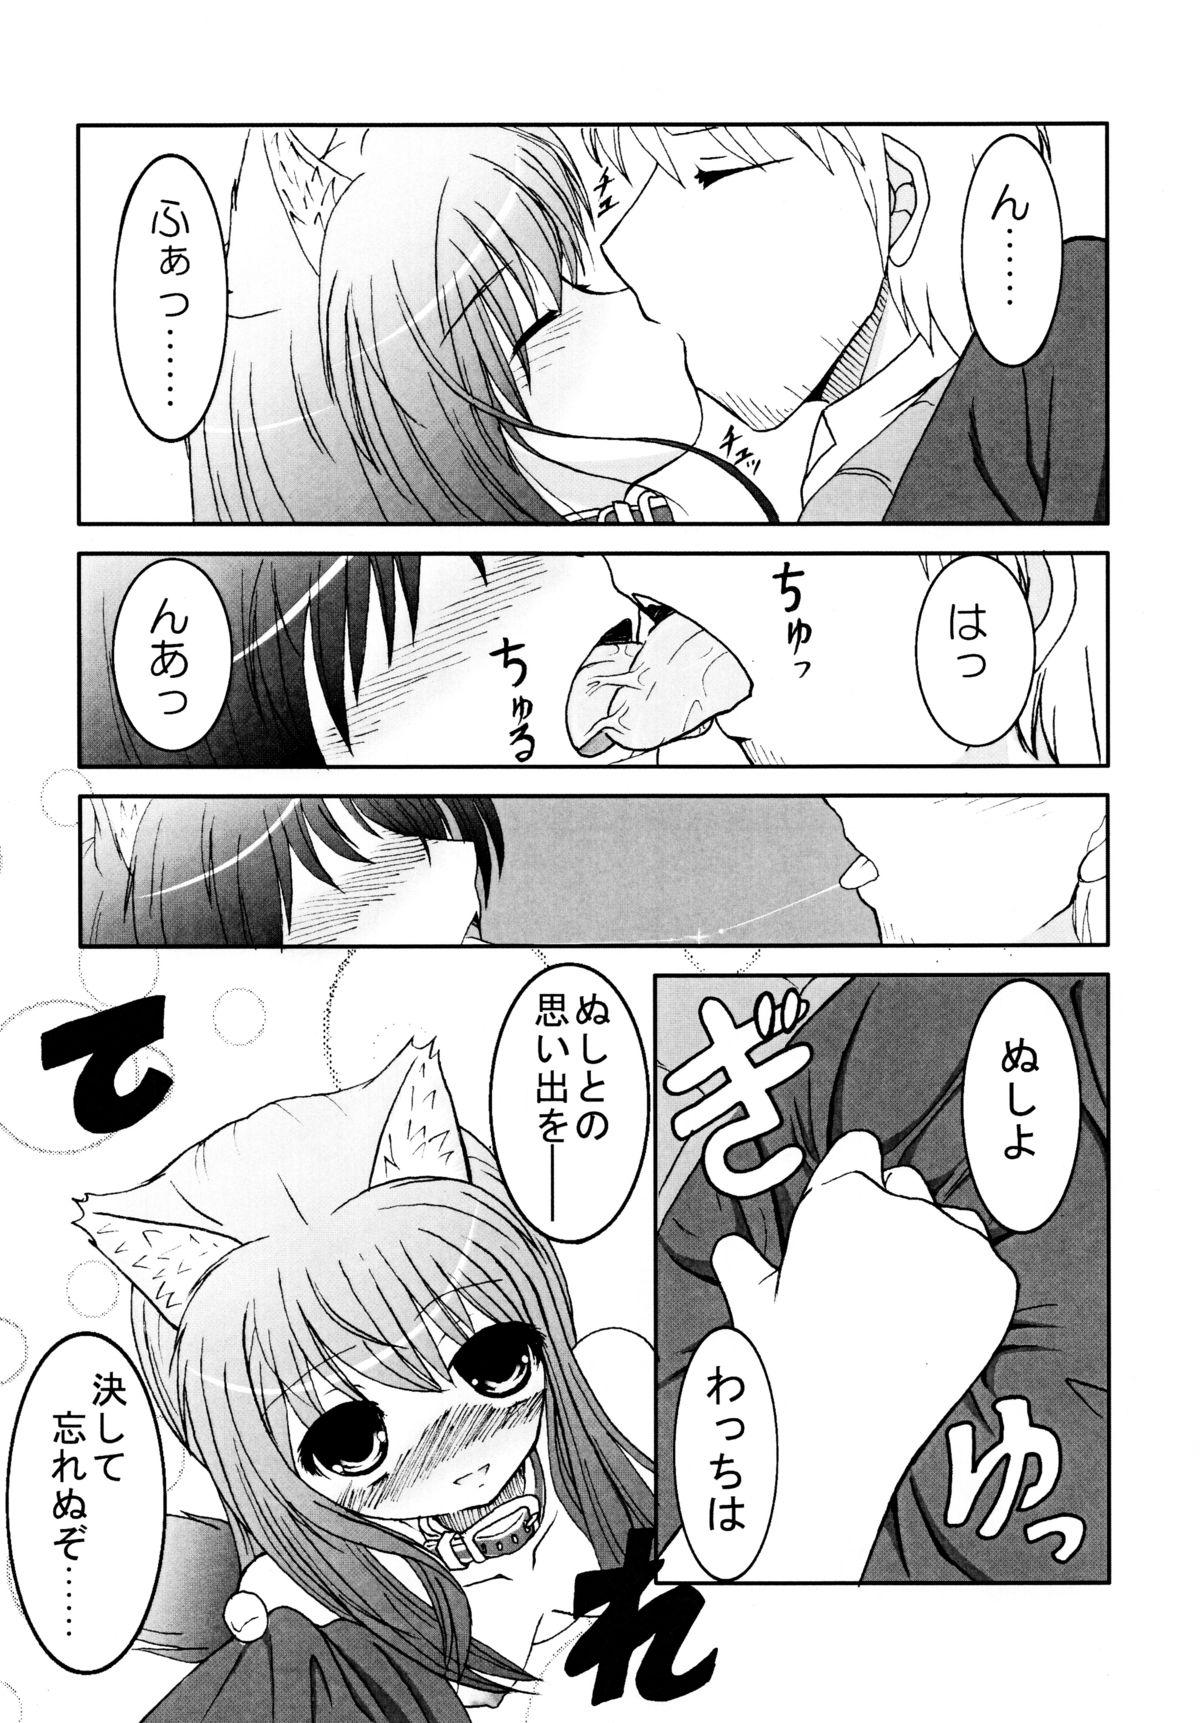 Female Ookami to Ai no Kusari - Spice and wolf Pinoy - Page 11